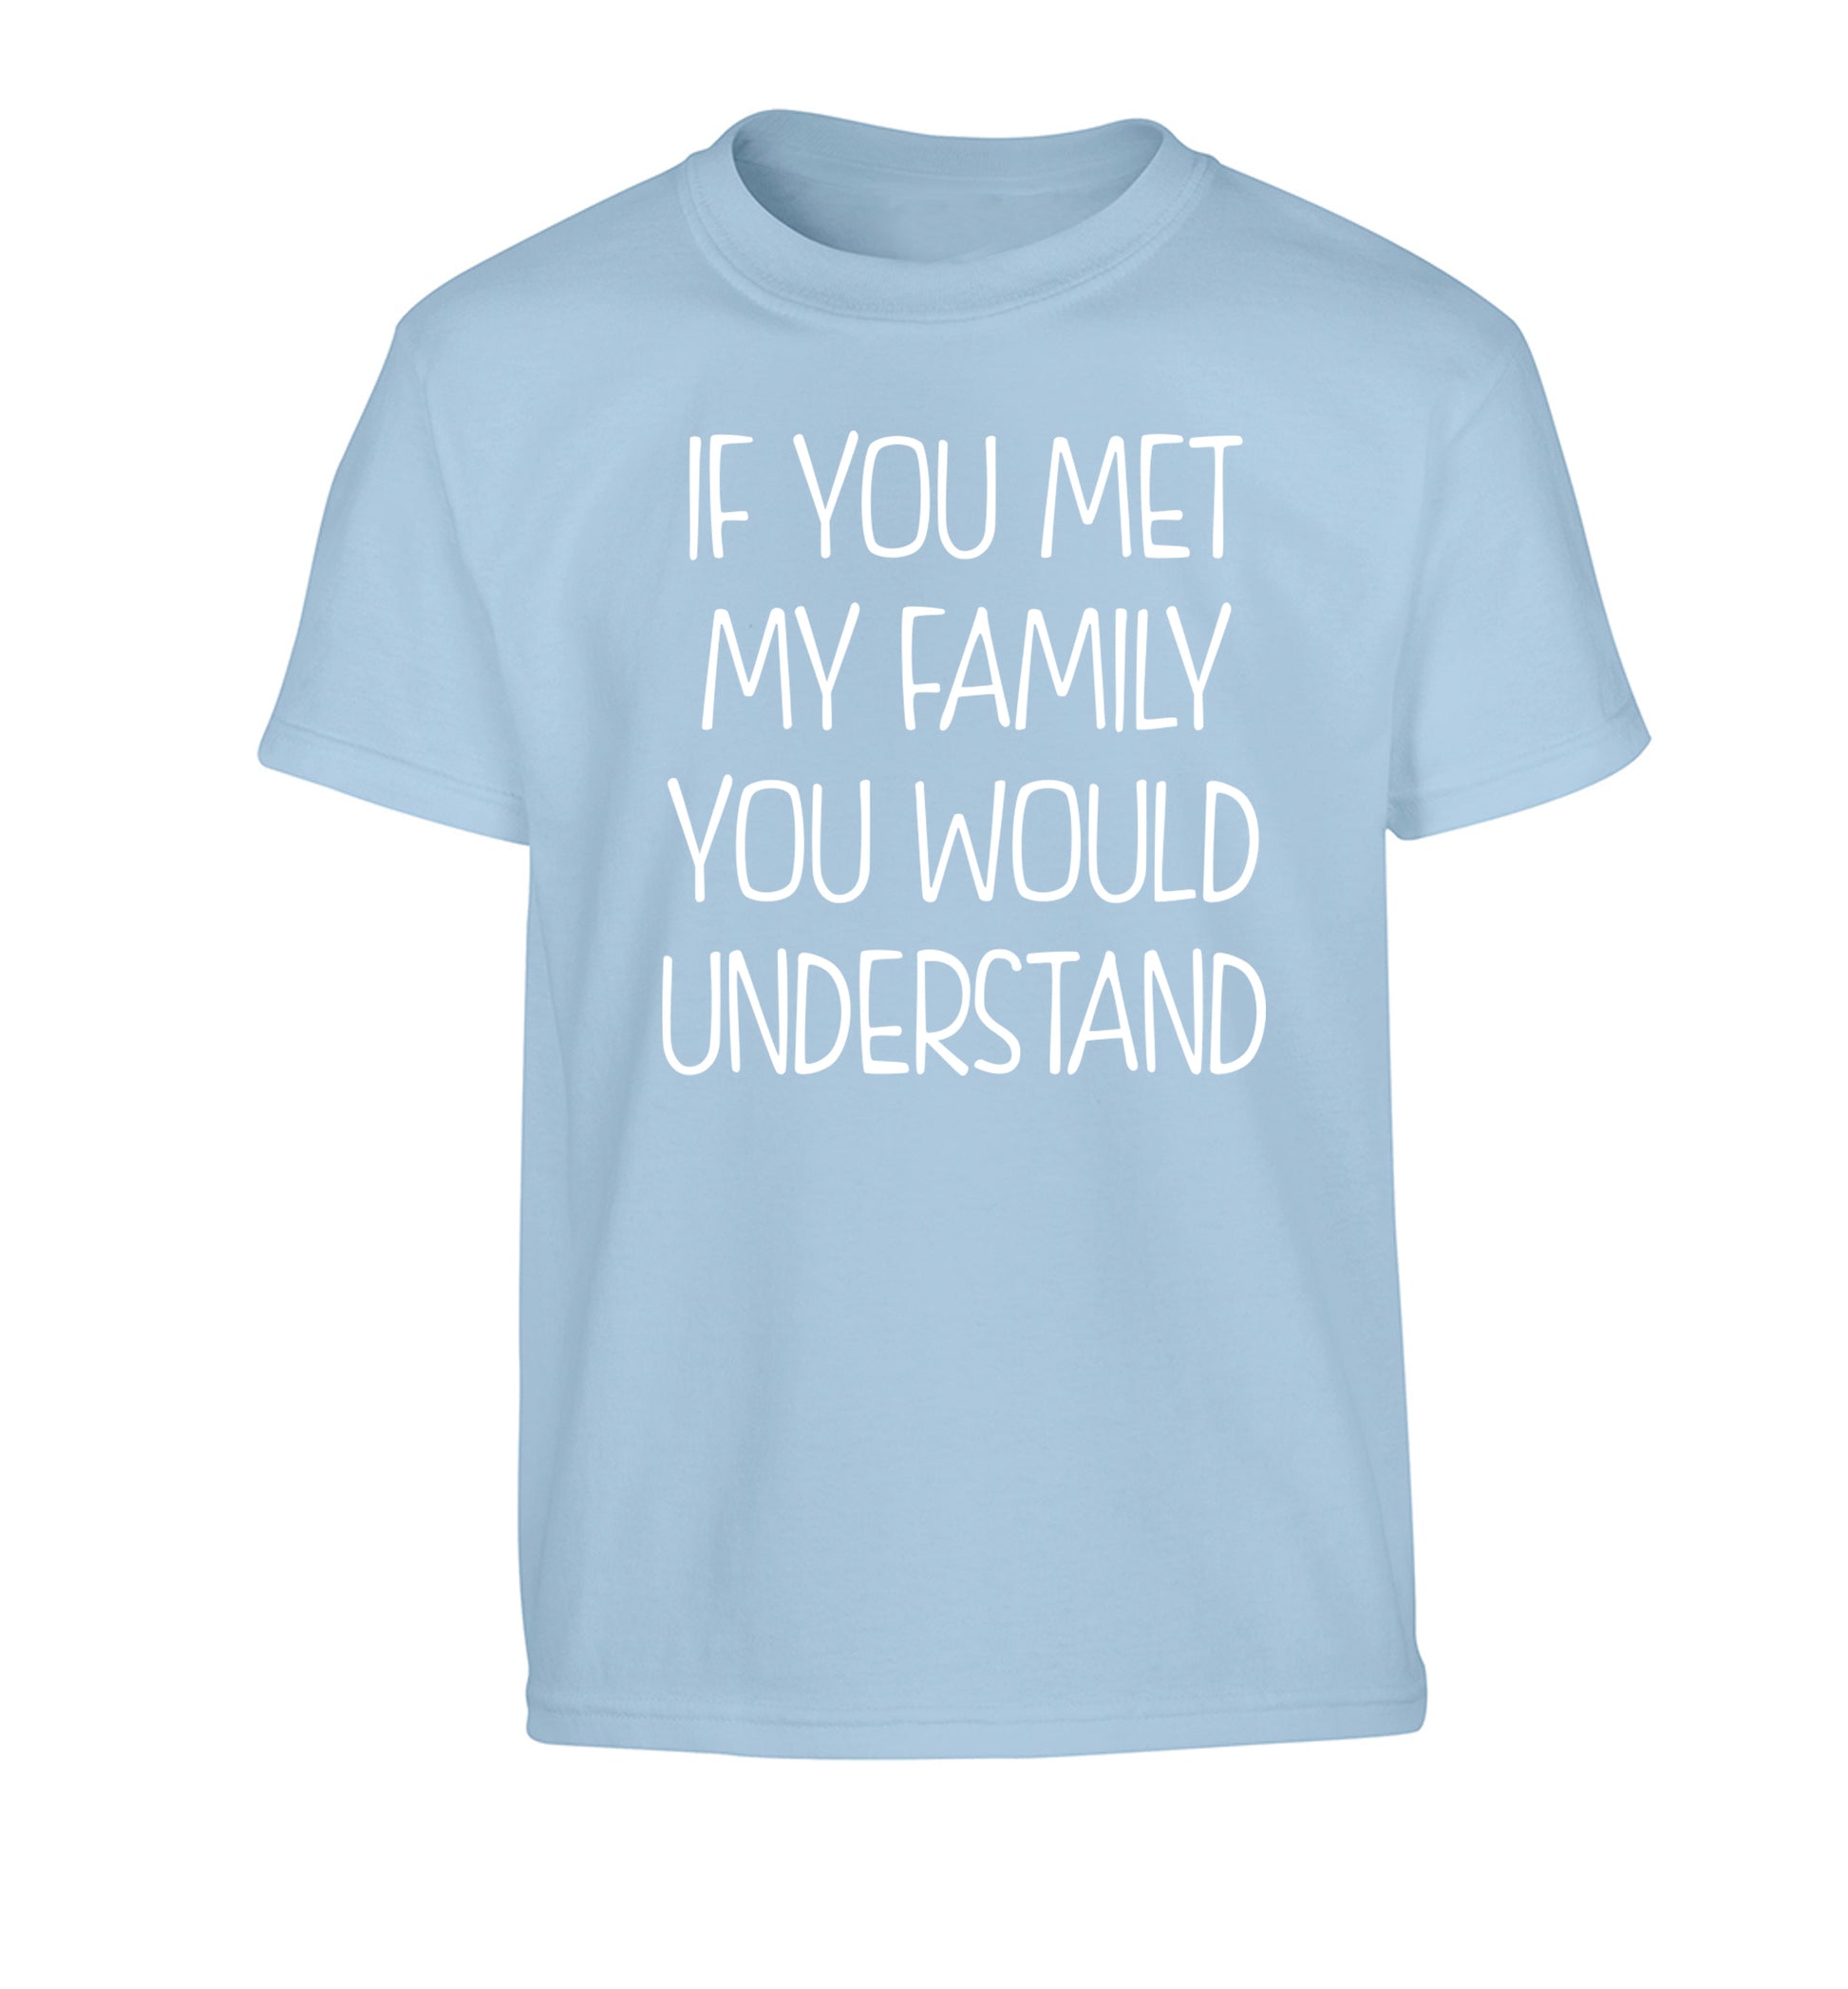 If you met my family you would understand Children's light blue Tshirt 12-13 Years